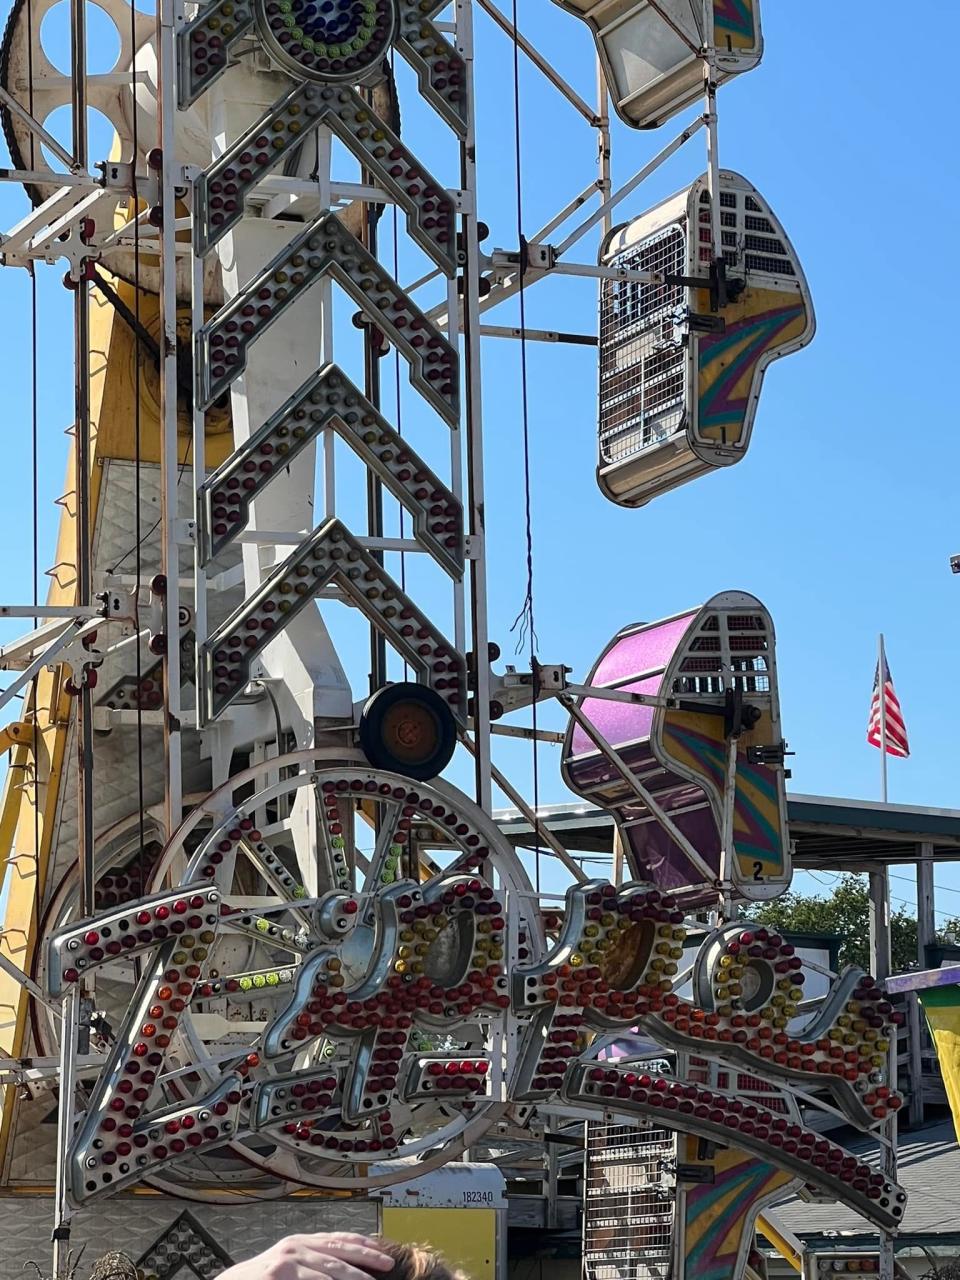 The Zipper, a ride at the Marshfield Fair, had to be evacuated after a cable started to fray with passengers on board.